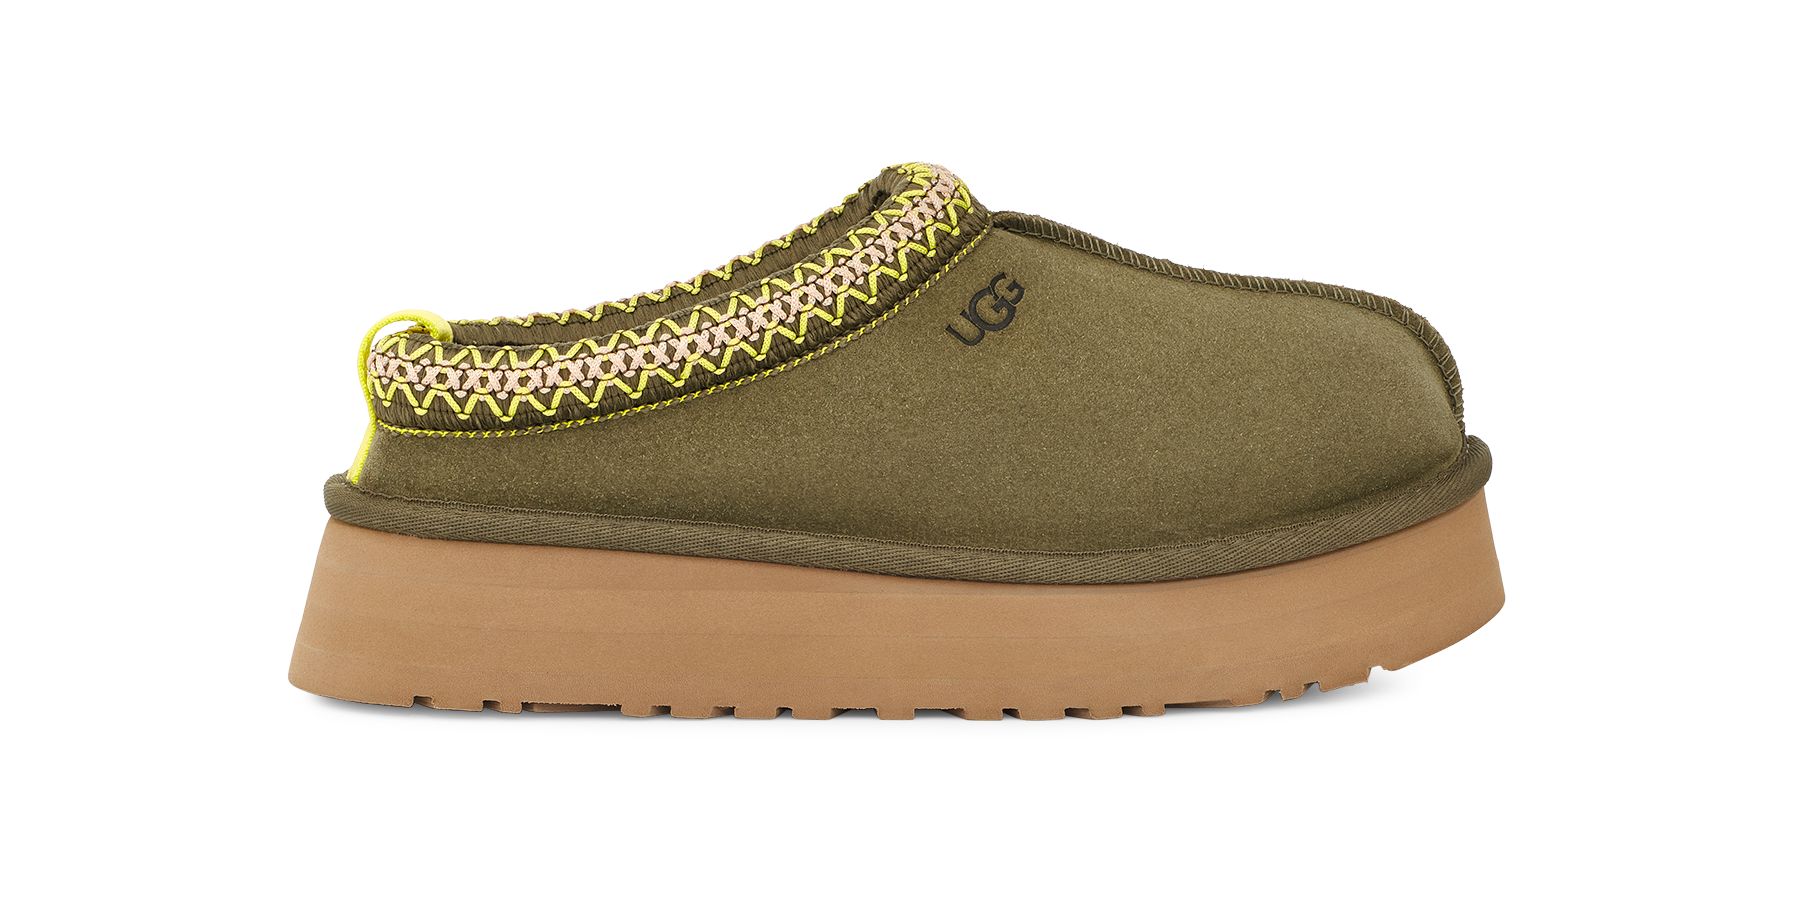 UGG Women's Tazz Suede Slippers in Burnt Olive, Size 7 | UGG (US)